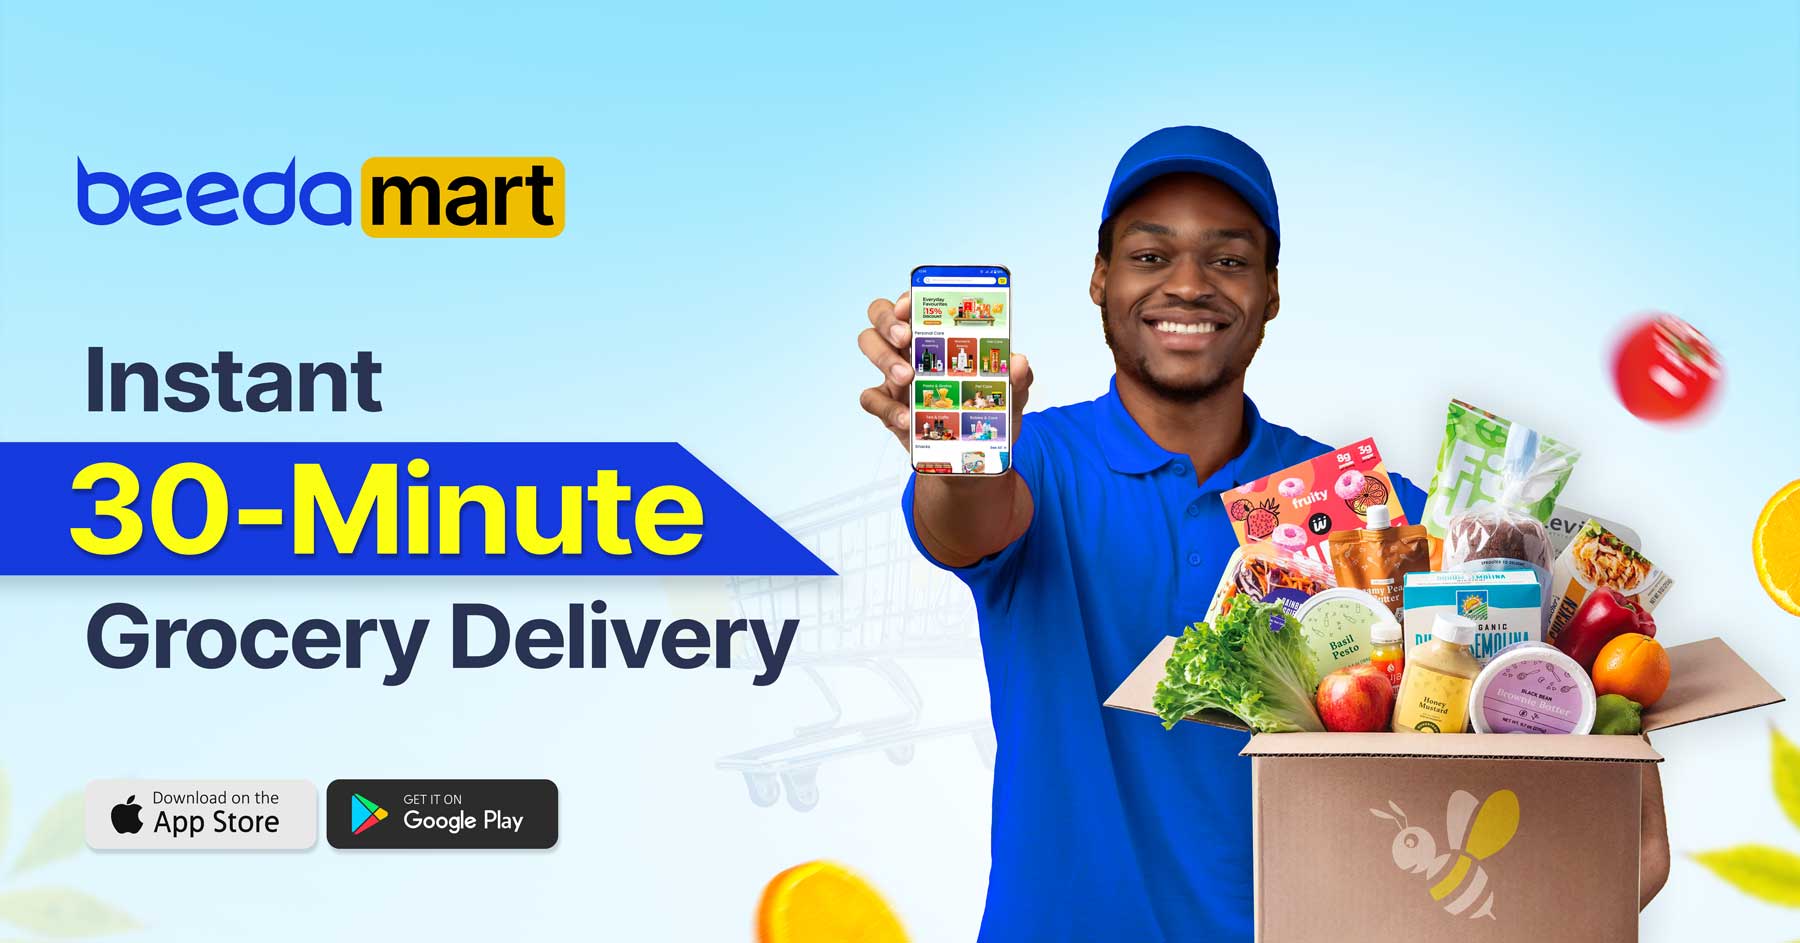 Super Fast Grocery Delivery - Get Your Groceries with Beedamart